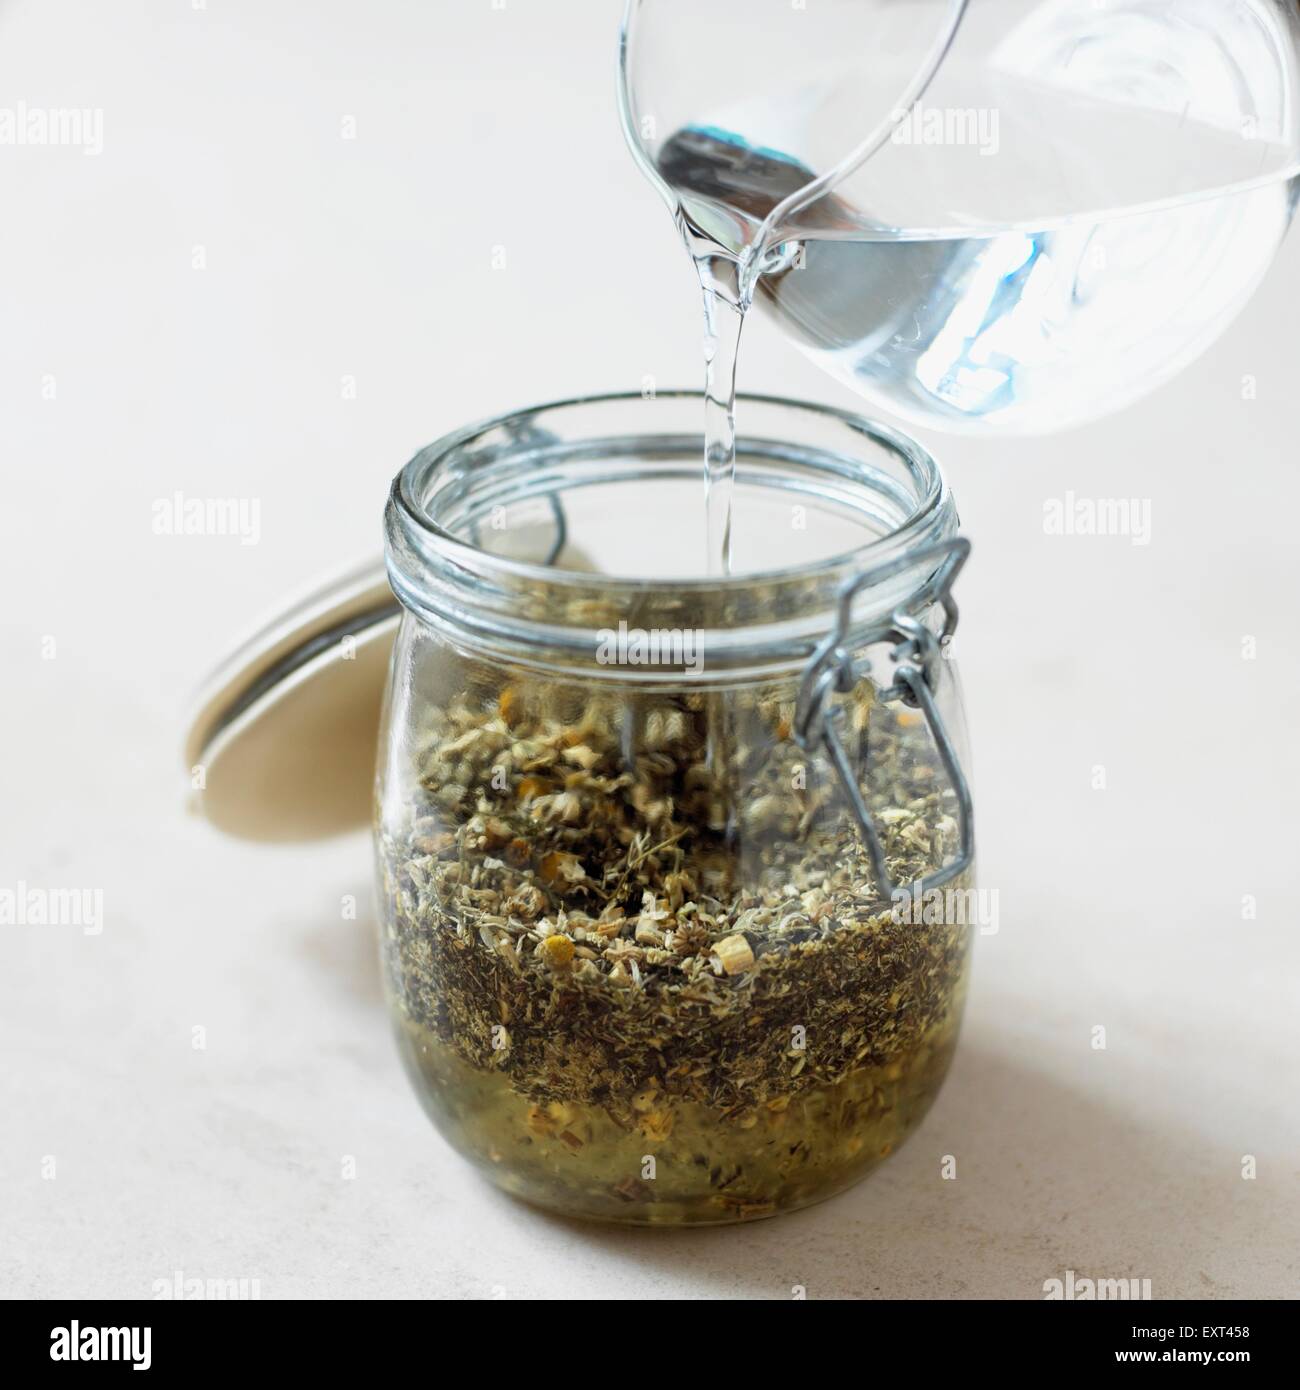 Making herbal tincture, pouring vodka into jar holding peppermint, thyme, chamomile, yarrow, liquorice root Stock Photo